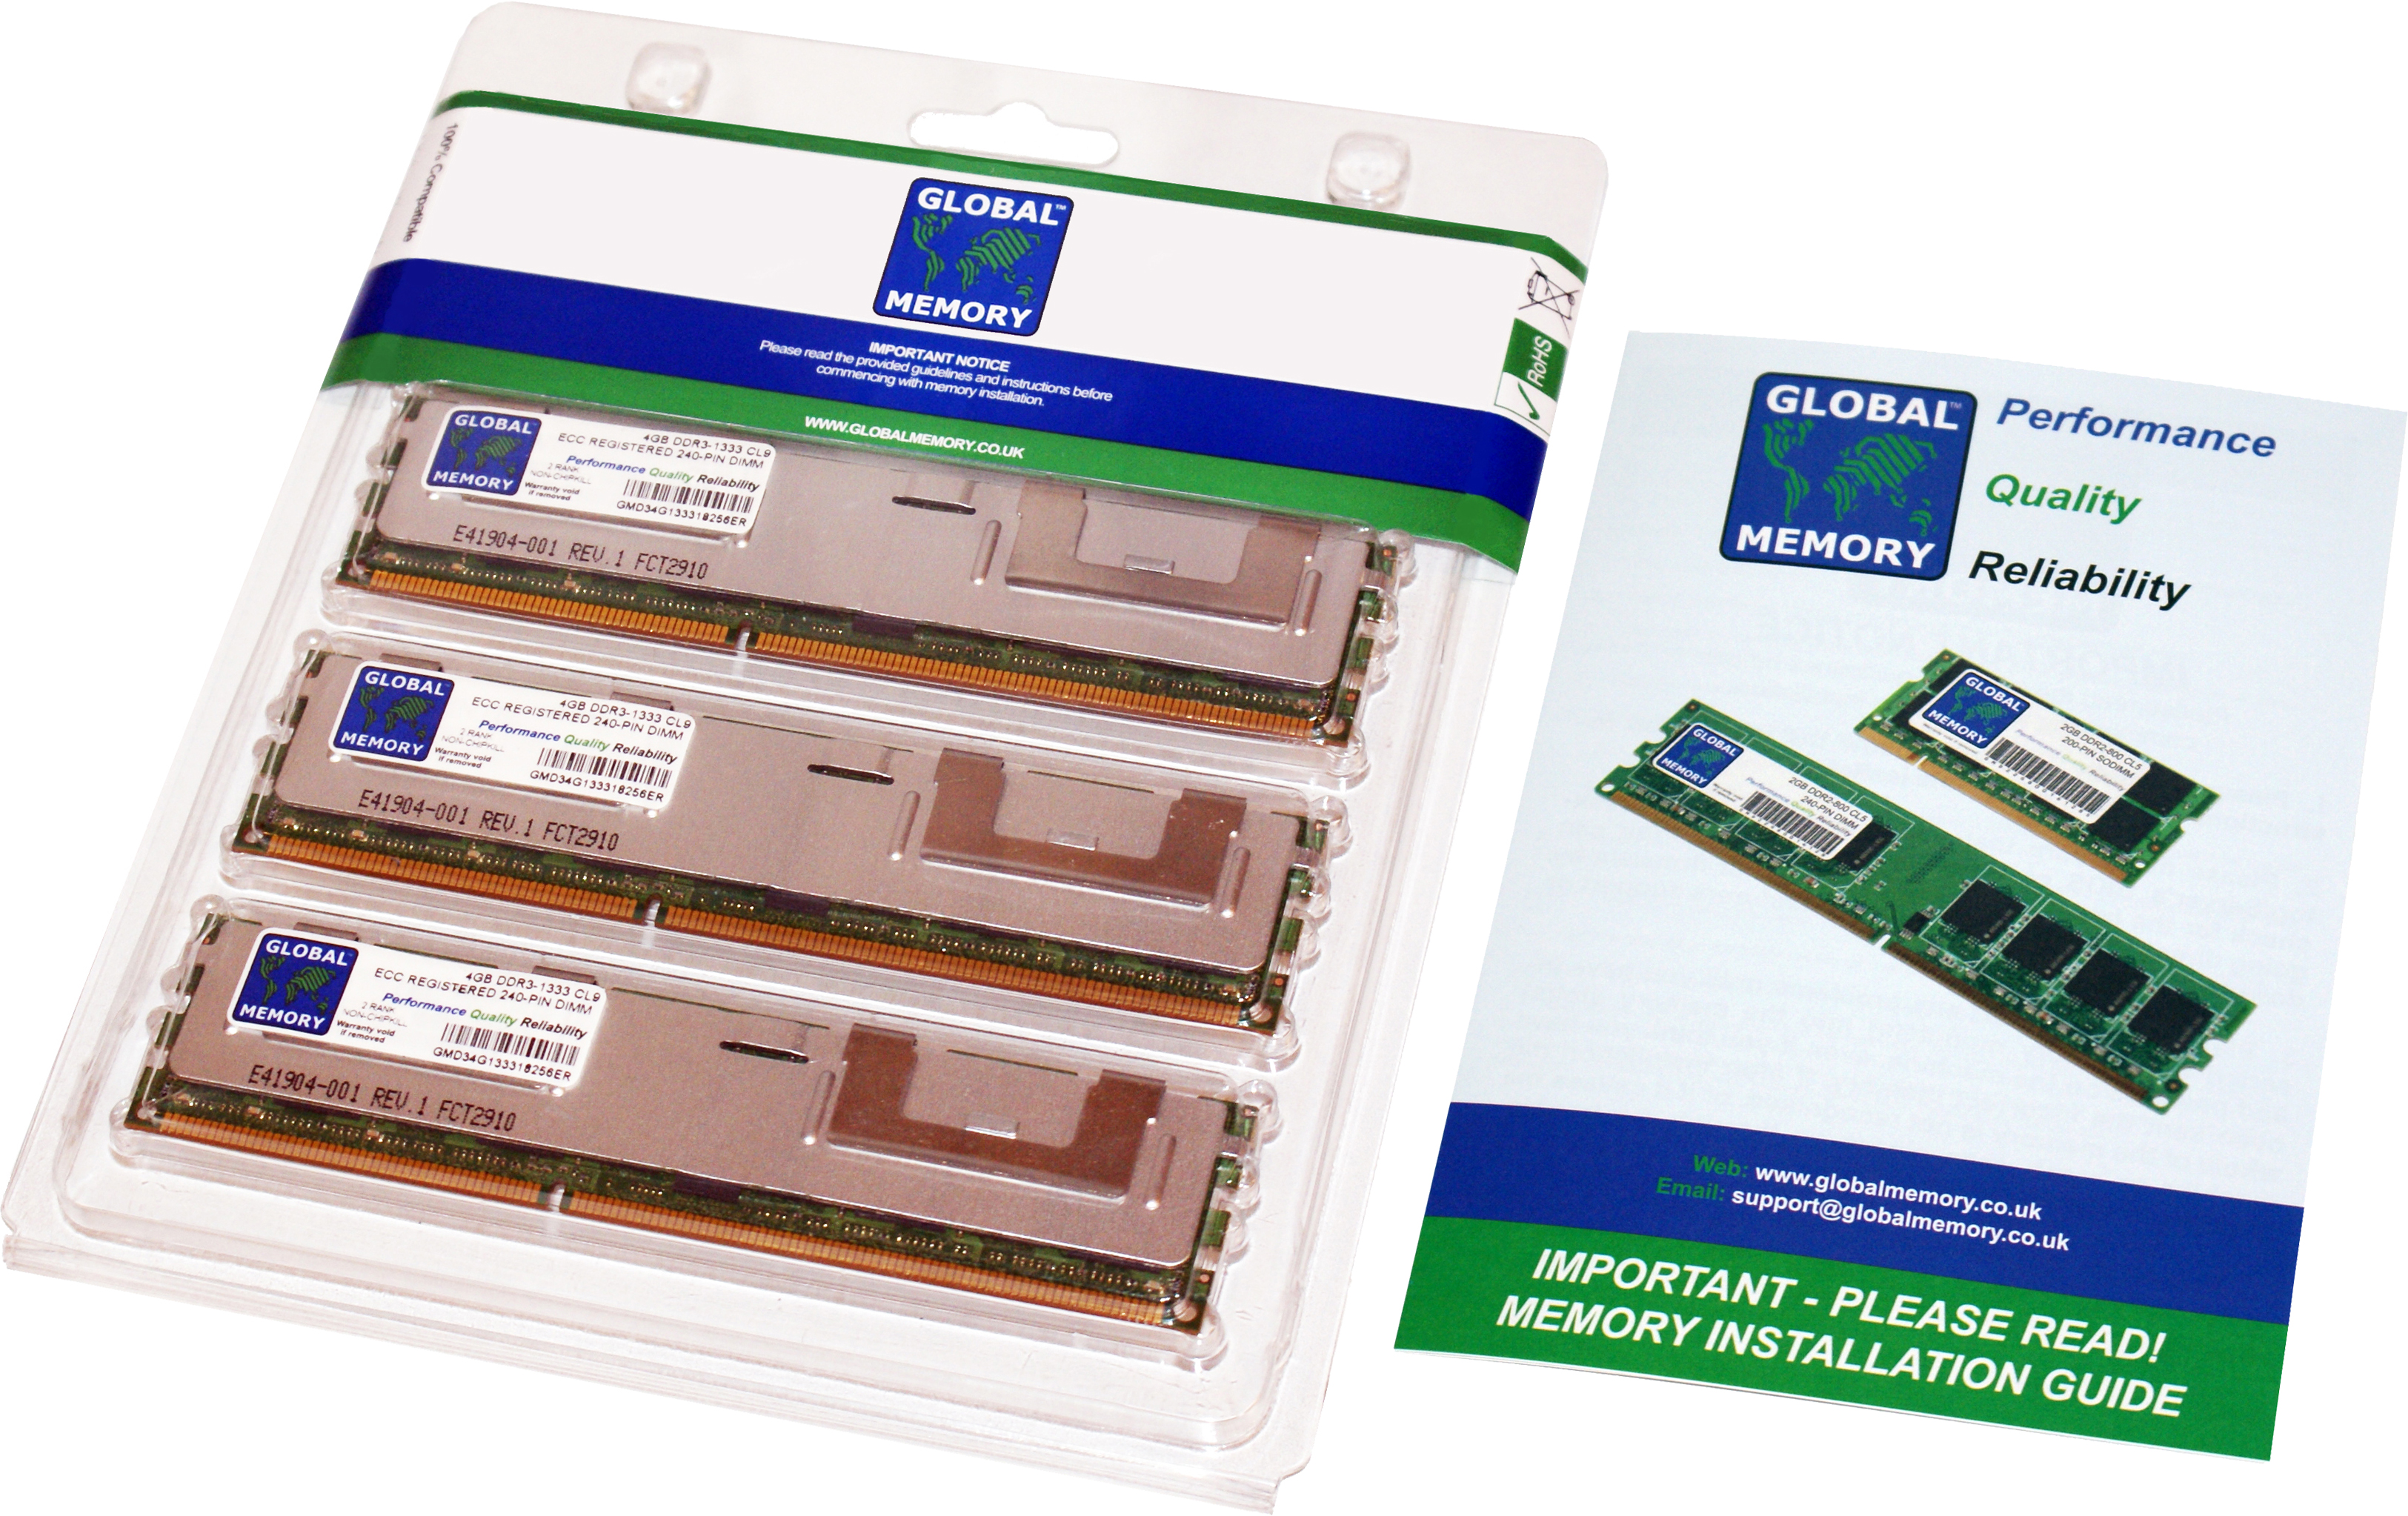 48GB (3 x 16GB) DDR3 1333MHz PC3-10600 240-PIN ECC REGISTERED DIMM (RDIMM) MEMORY RAM KIT FOR SERVERS/WORKSTATIONS/MOTHERBOARDS (12 RANK KIT NON-CHIPKILL)